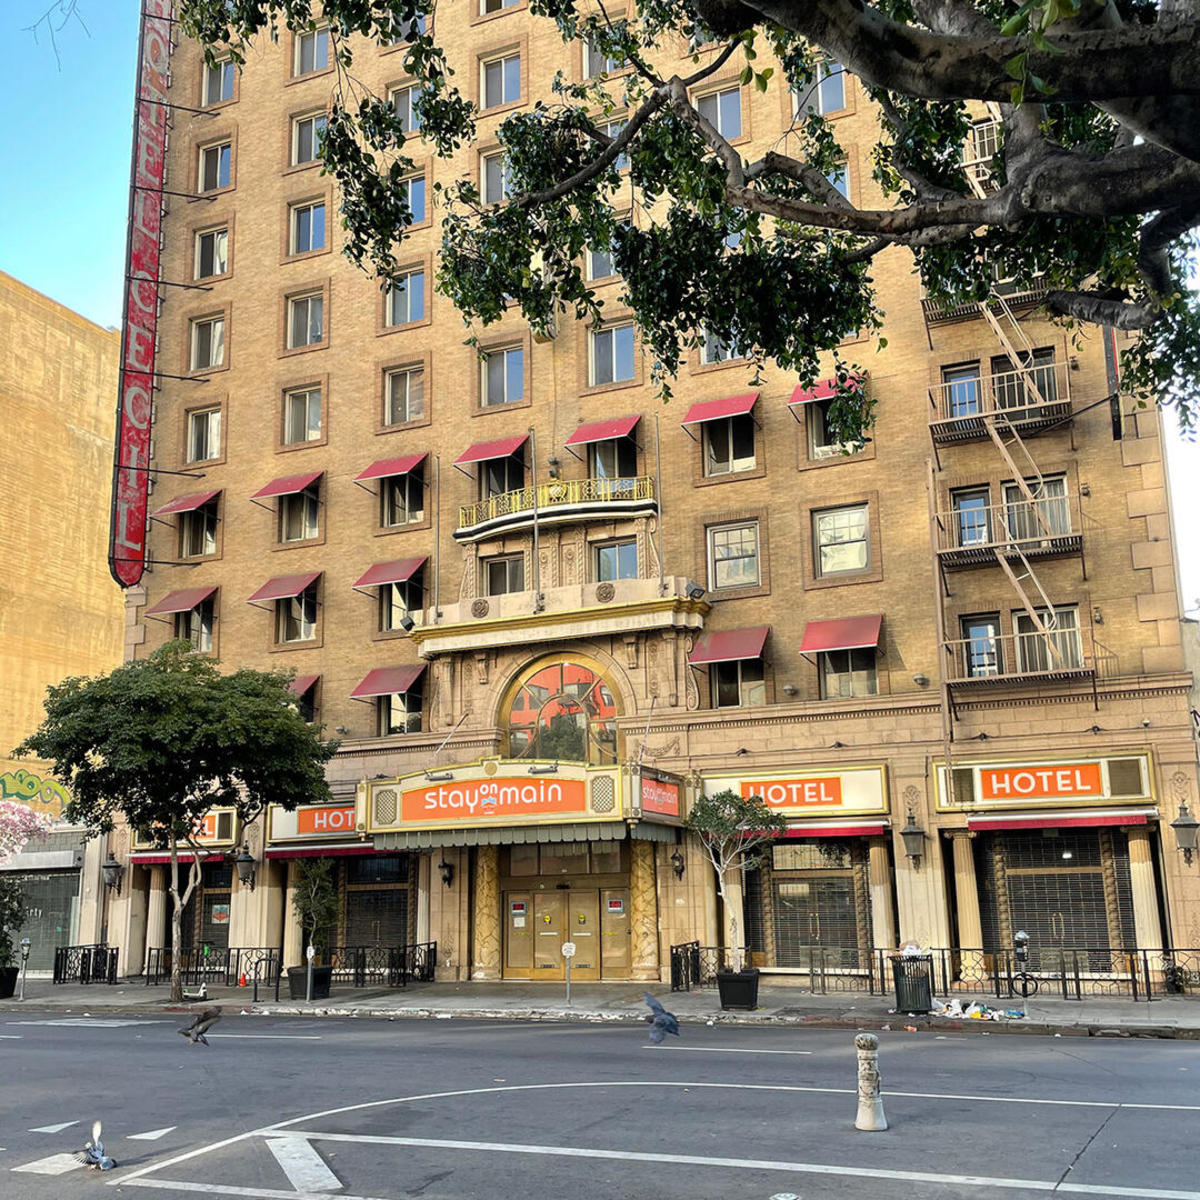 The Cecil Hotel in Los Angeles. This is where Elisa Lam died.